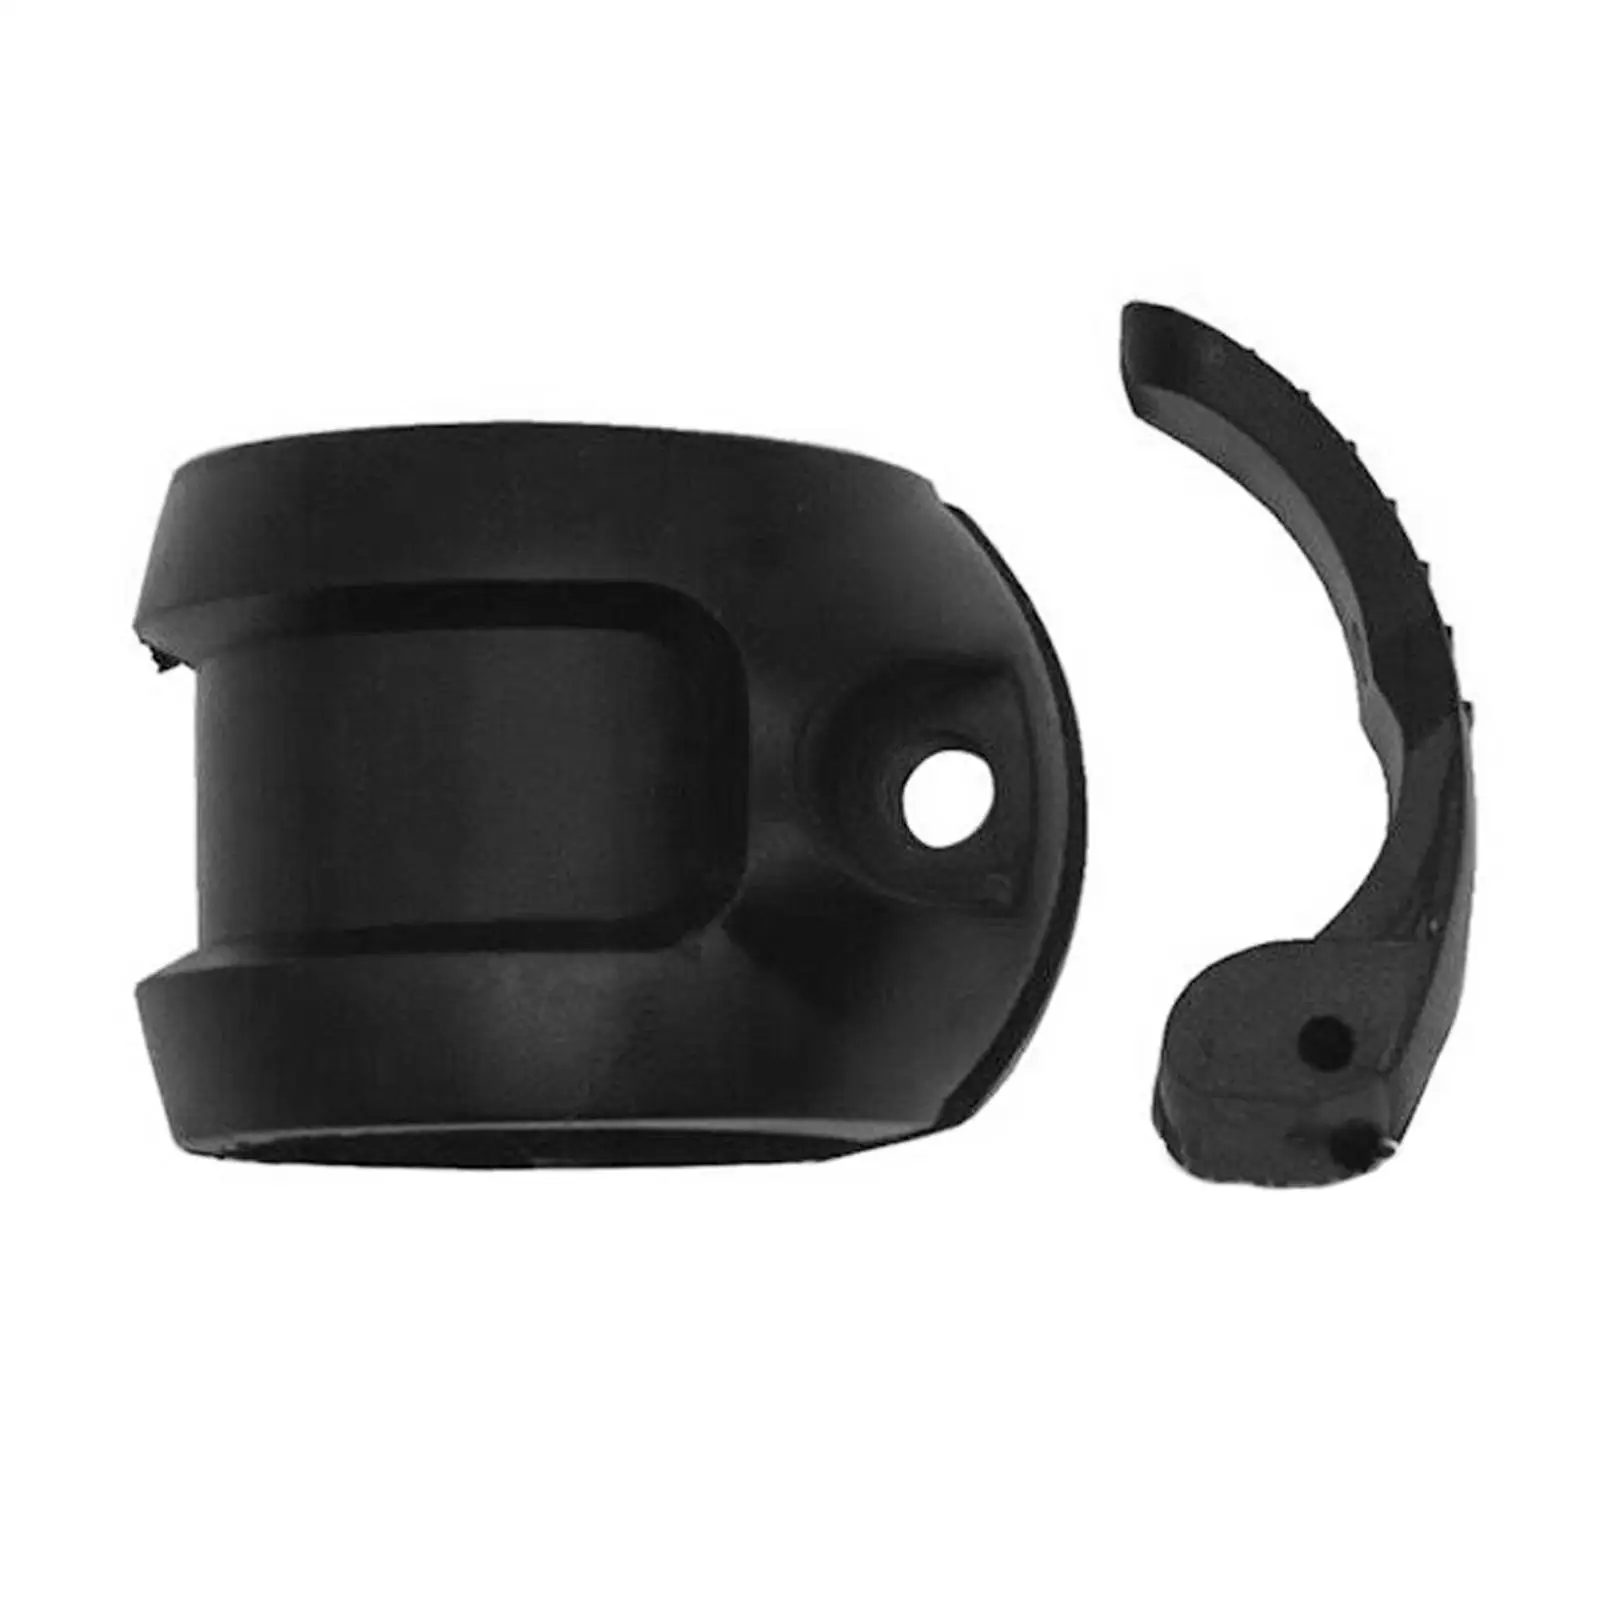 Surf Paddle Lock Part Paddle Clamp for Kayaking Outdoor Recreation Surfing